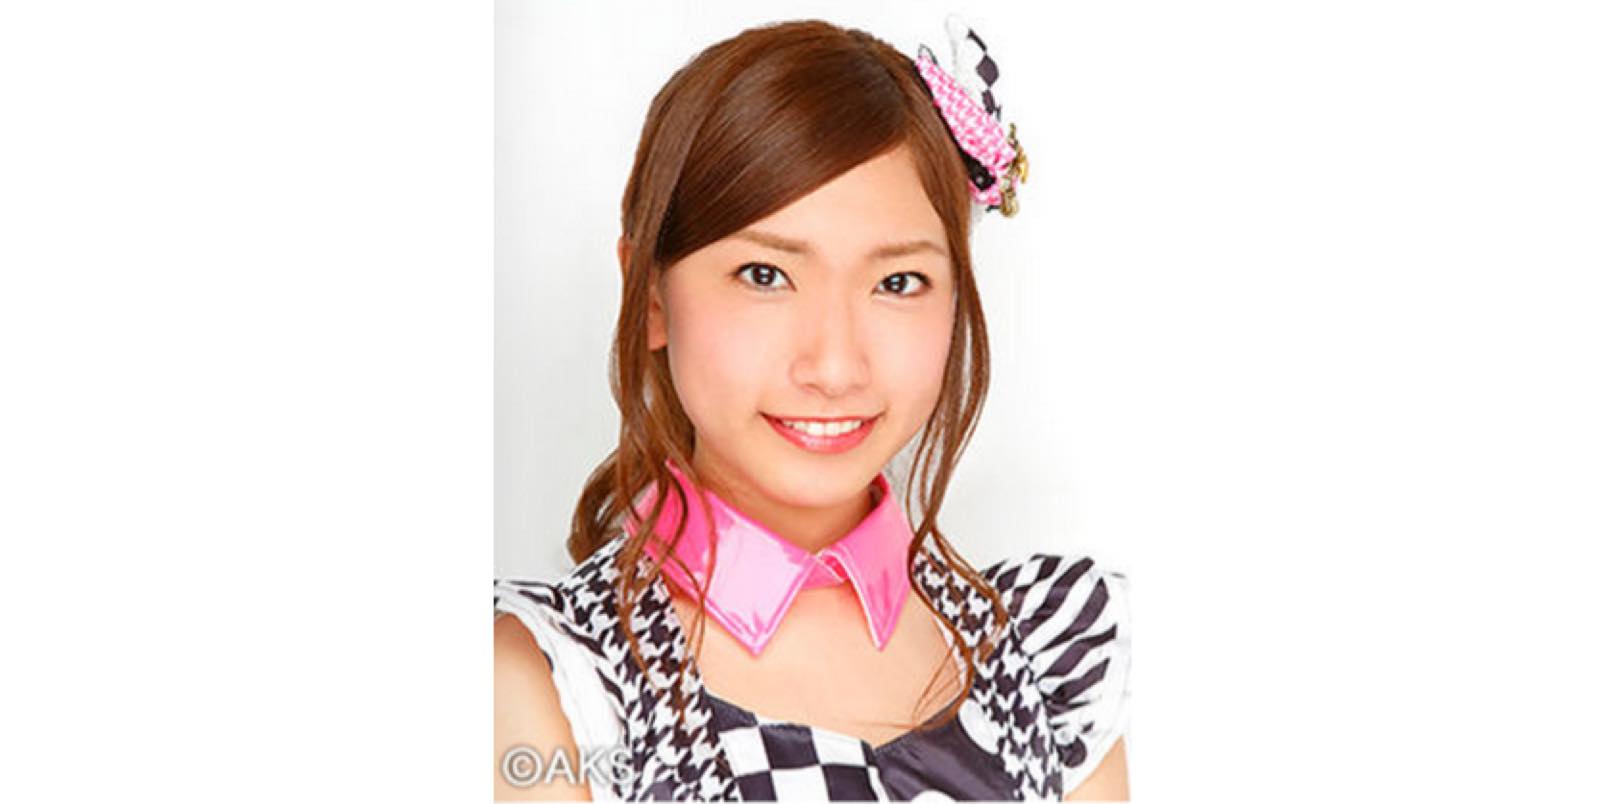 Ayaka Morikawa Announces Graduation From AKB48 to Pursue Dream of Becoming a Model